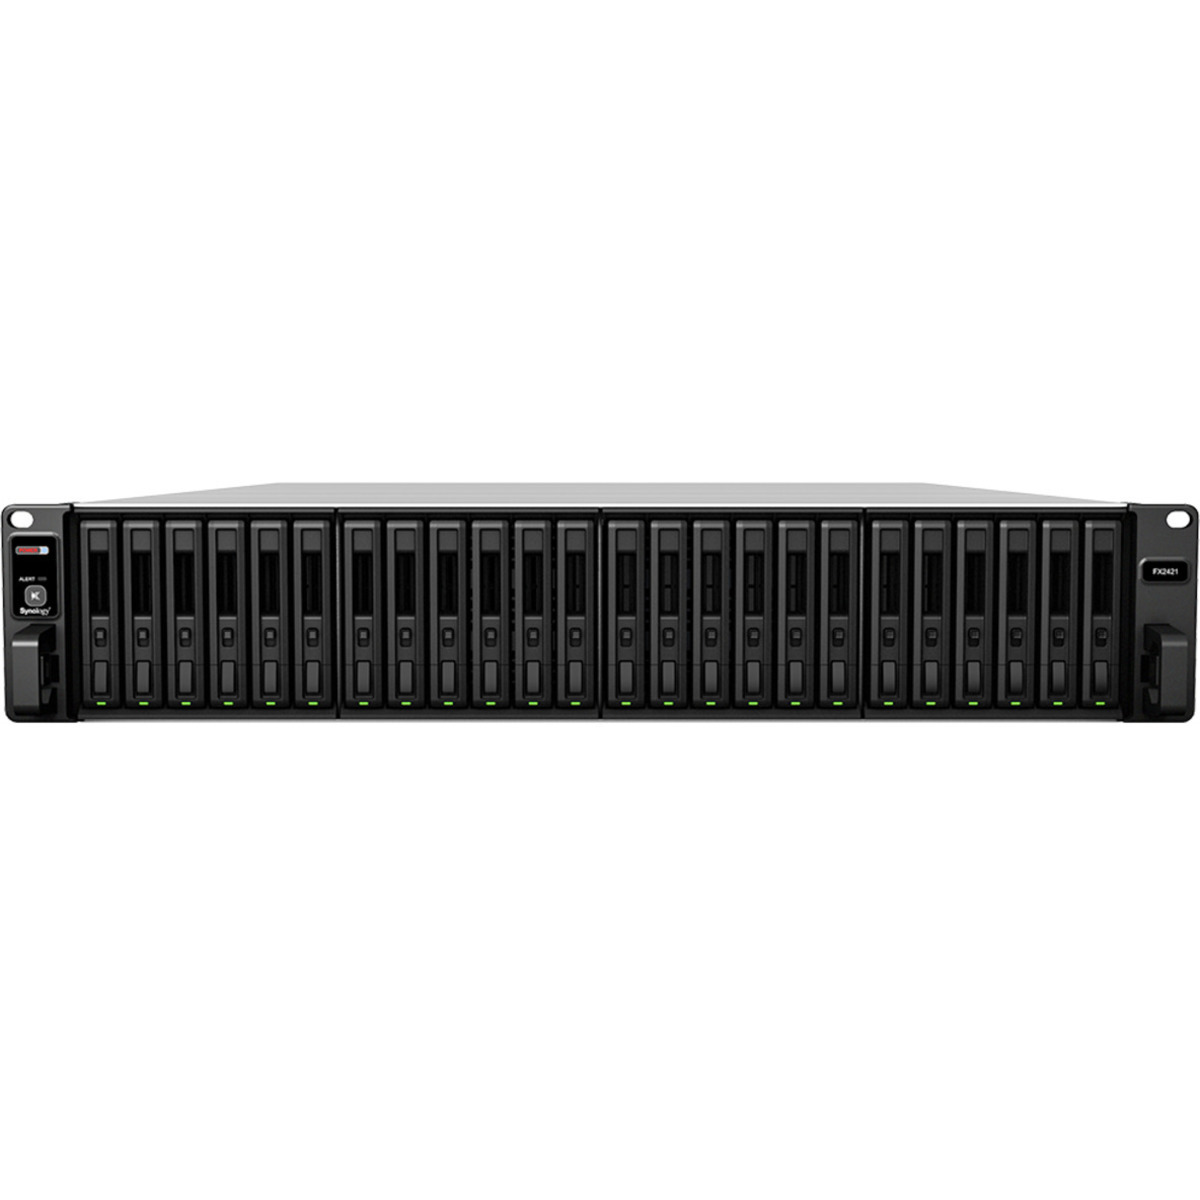 buy $24948 Synology FX2421 192tb RackMount Expansion Enclosure 24x8000gb Samsung 870 QVO MZ-77Q8T0 2.5 SATA 6Gb/s SSD CONSUMER Class Drives Installed - Burn-In Tested - nas headquarters buy network attached storage server device das new raid-5 free shipping usa christmas new year holiday sale FX2421